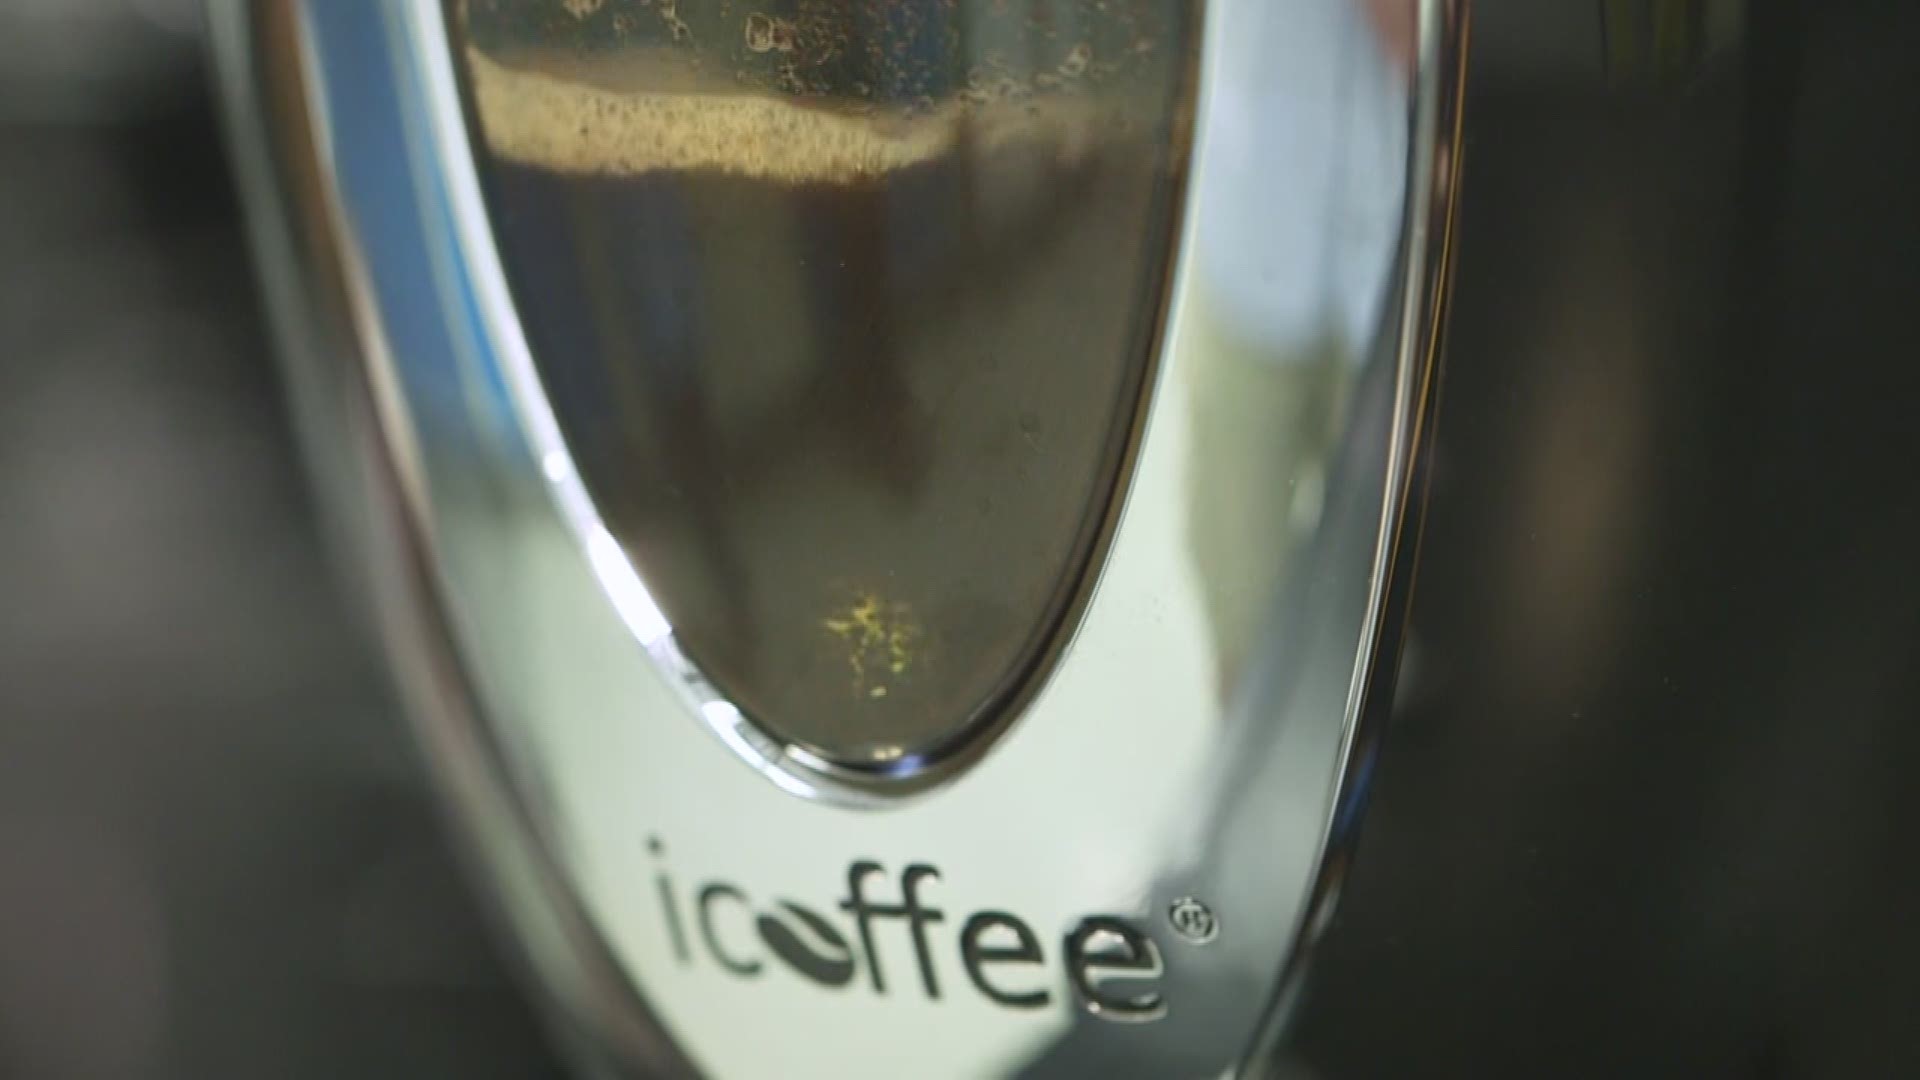 Consumer Reports rates the best coffee makers for your dollar.